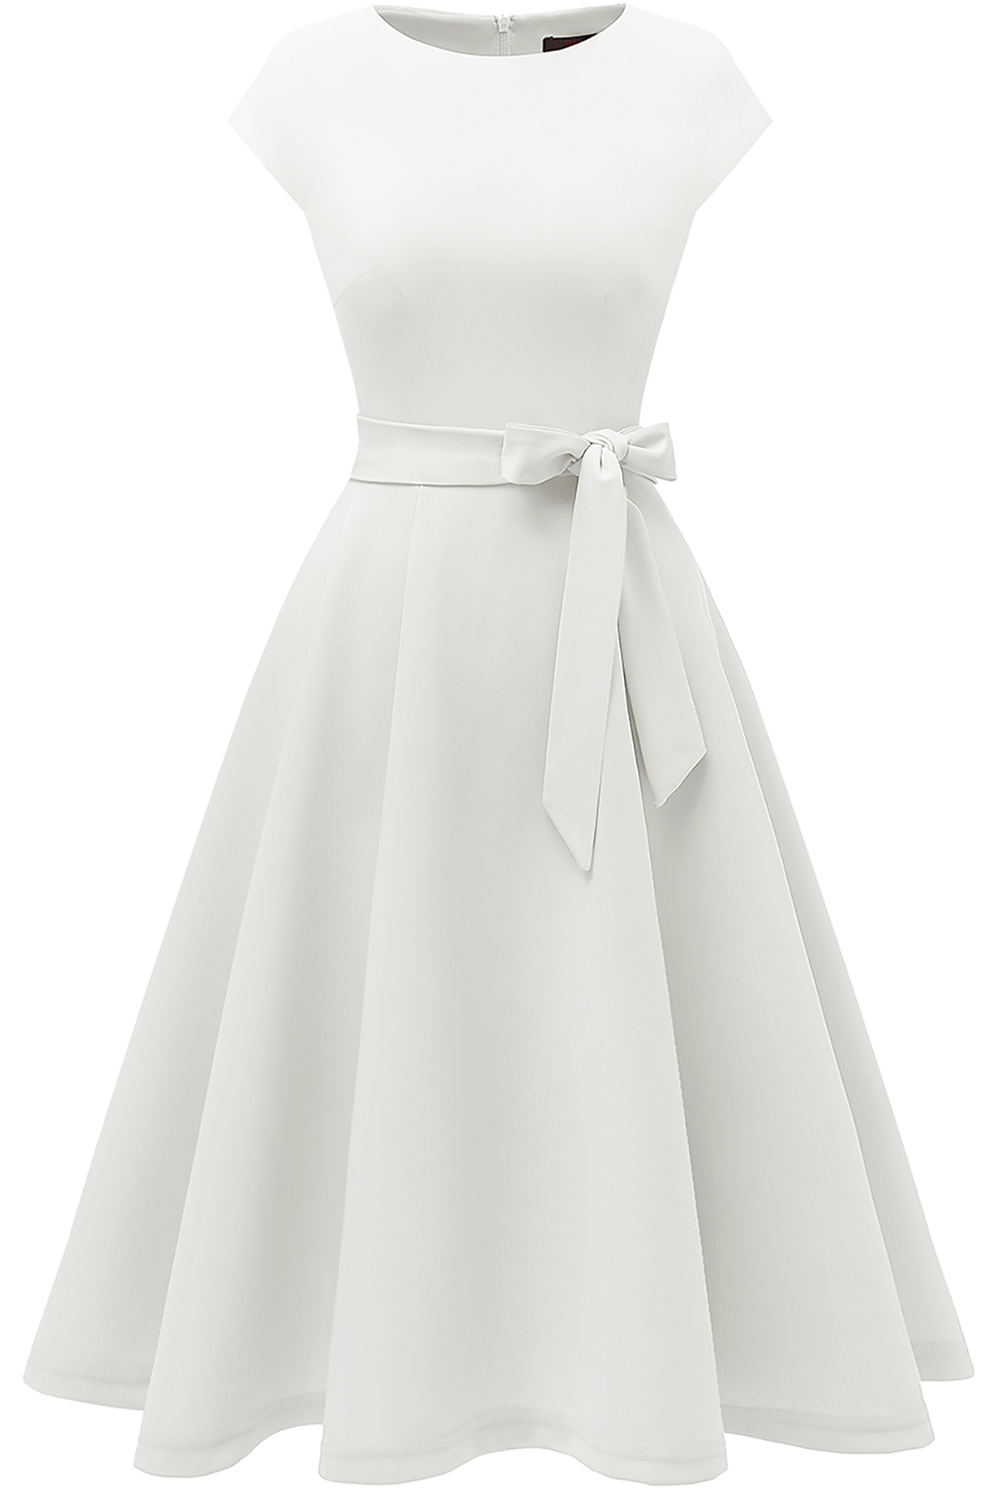 A-Line Knee-Length White Cocktail Dress with Cap Sleeves, Vintage Style, Unique and Elegant